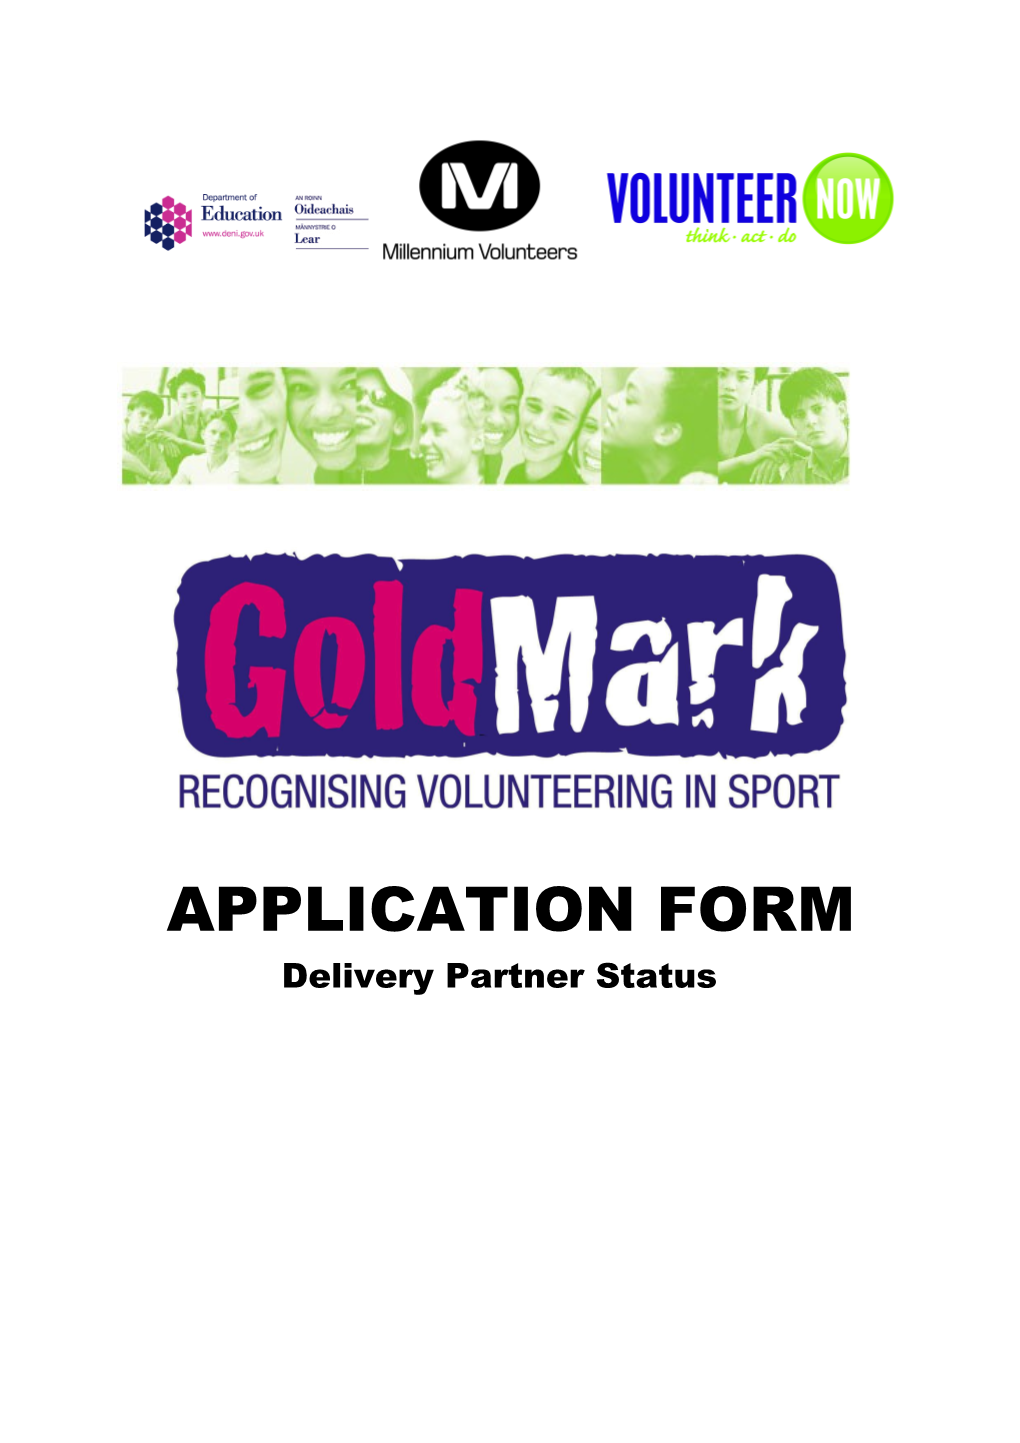 Please Read the Guide Before Completing This Application Form